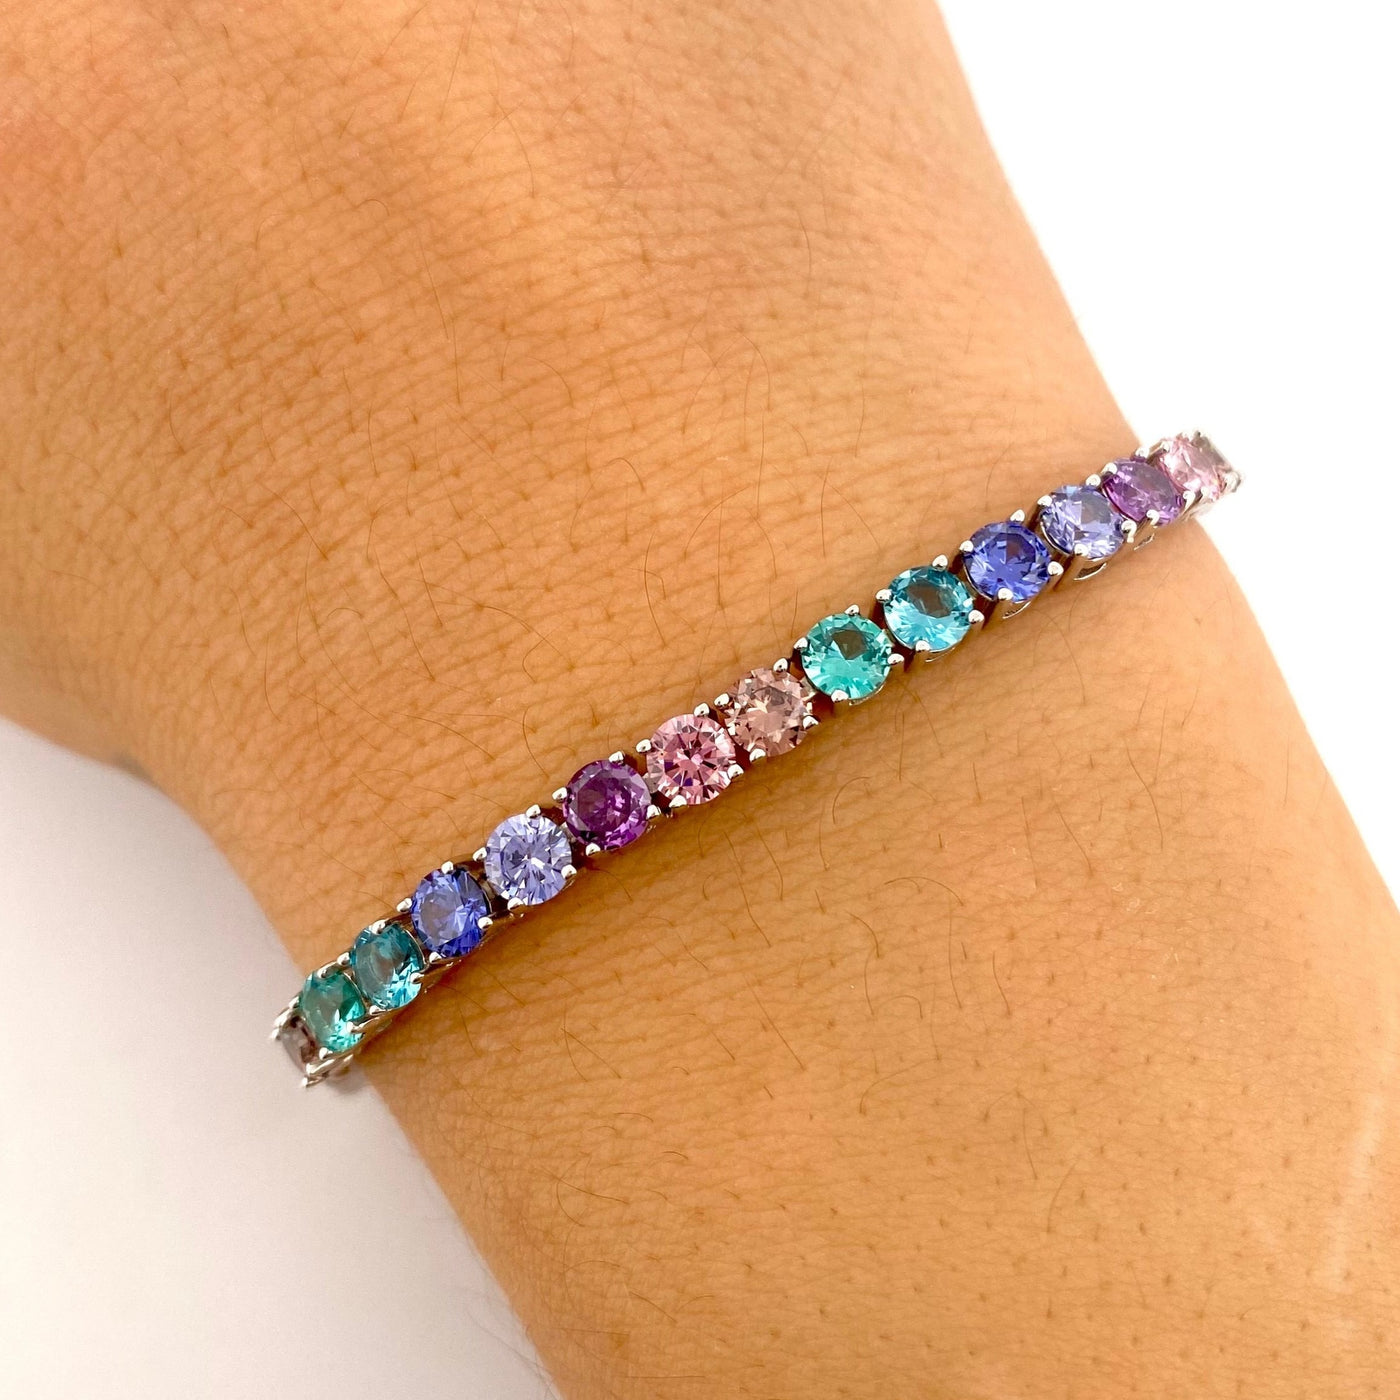 SILVER BRACELET WITH COLORED STONES